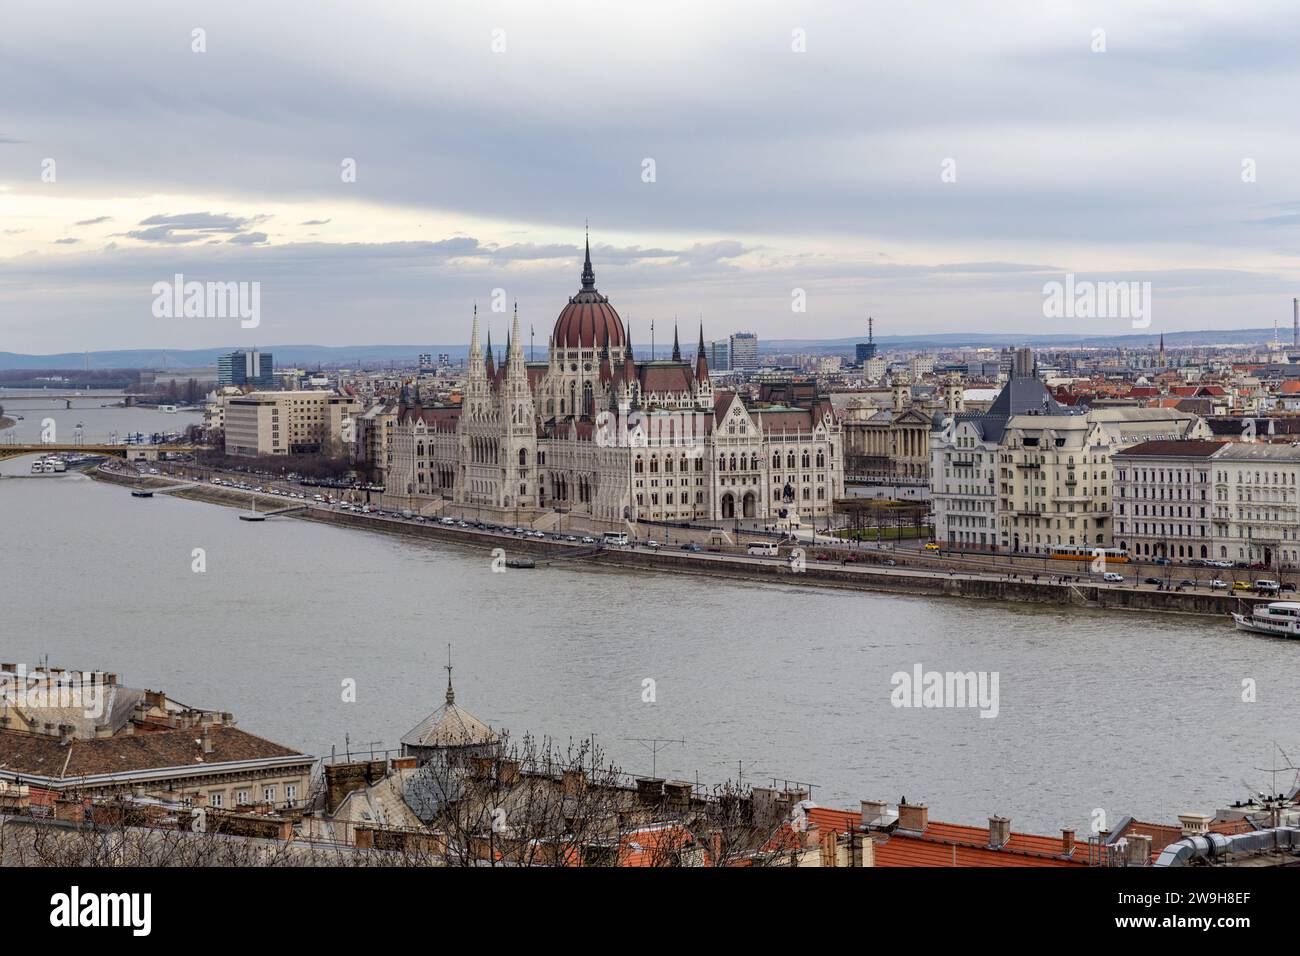 BUDAPEST, HUNGARY - MARTH 14, 2023: This is a view of the neo-Gothic building of the Hungarian Parliament from the heights of Buda Hill. Stock Photo